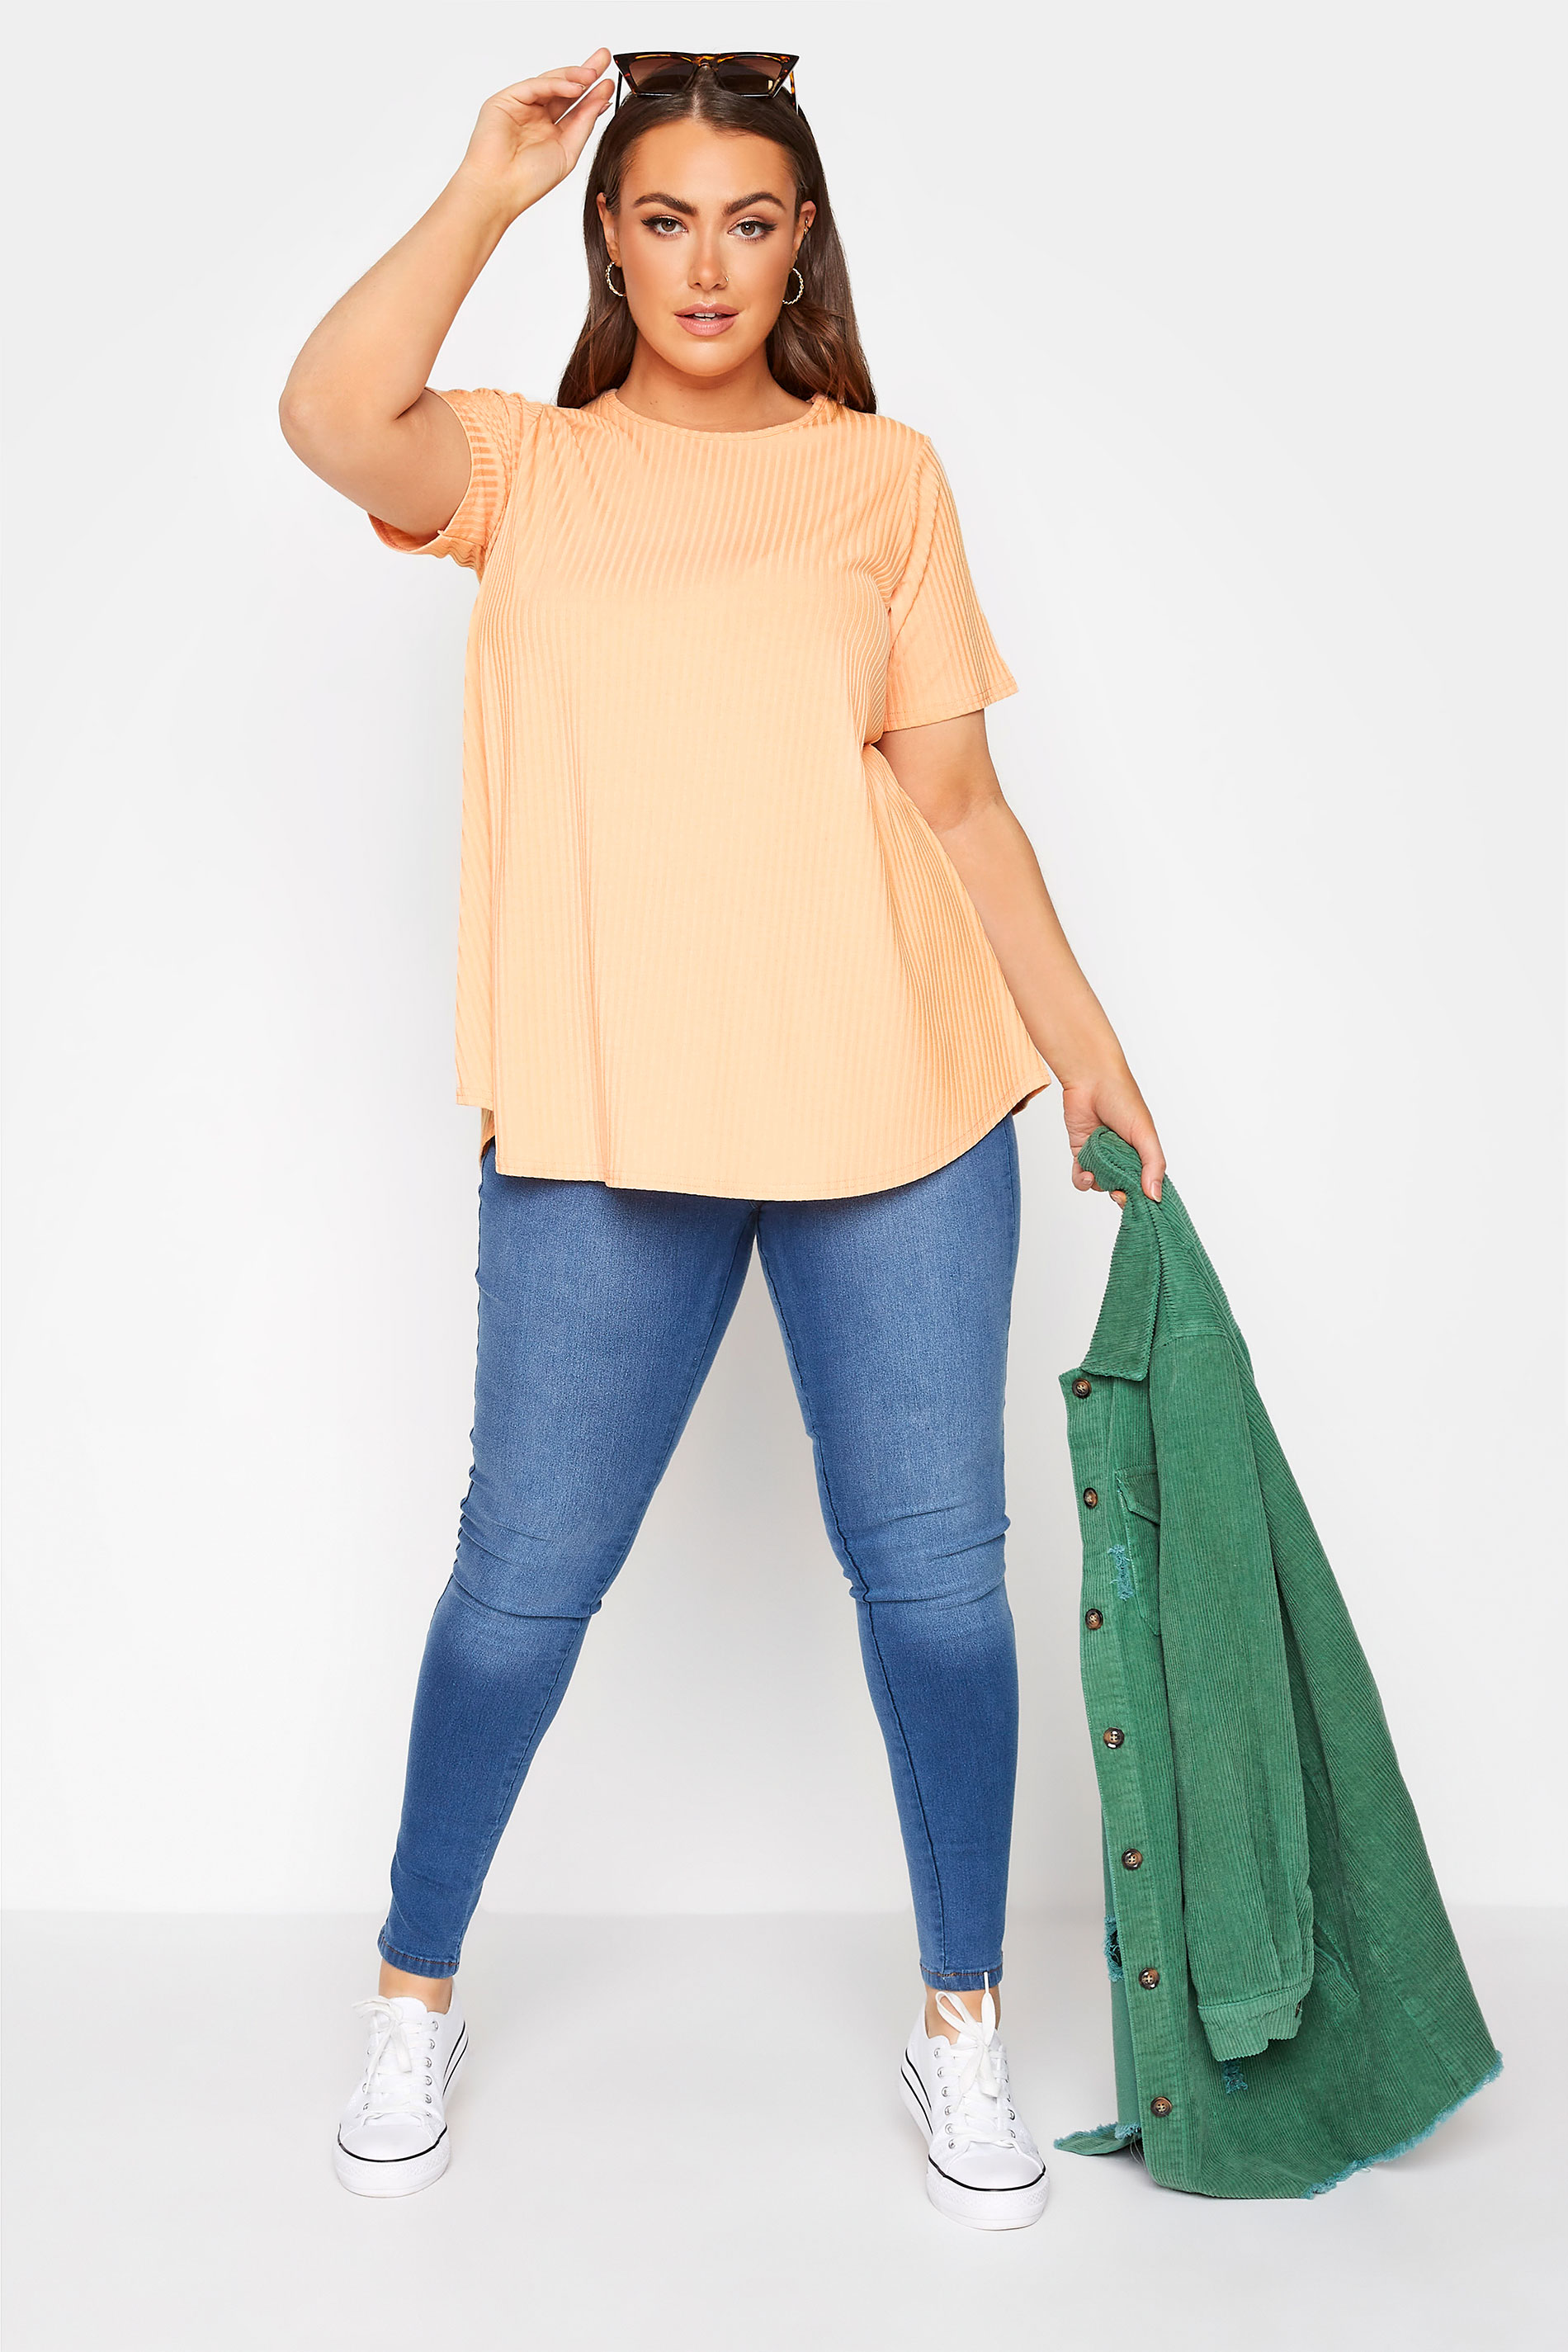 Grande taille  Tops Grande taille  Tops Jersey | LIMITED COLLECTION - Top Orange Pastel Nervuré Style Volanté - NN31385